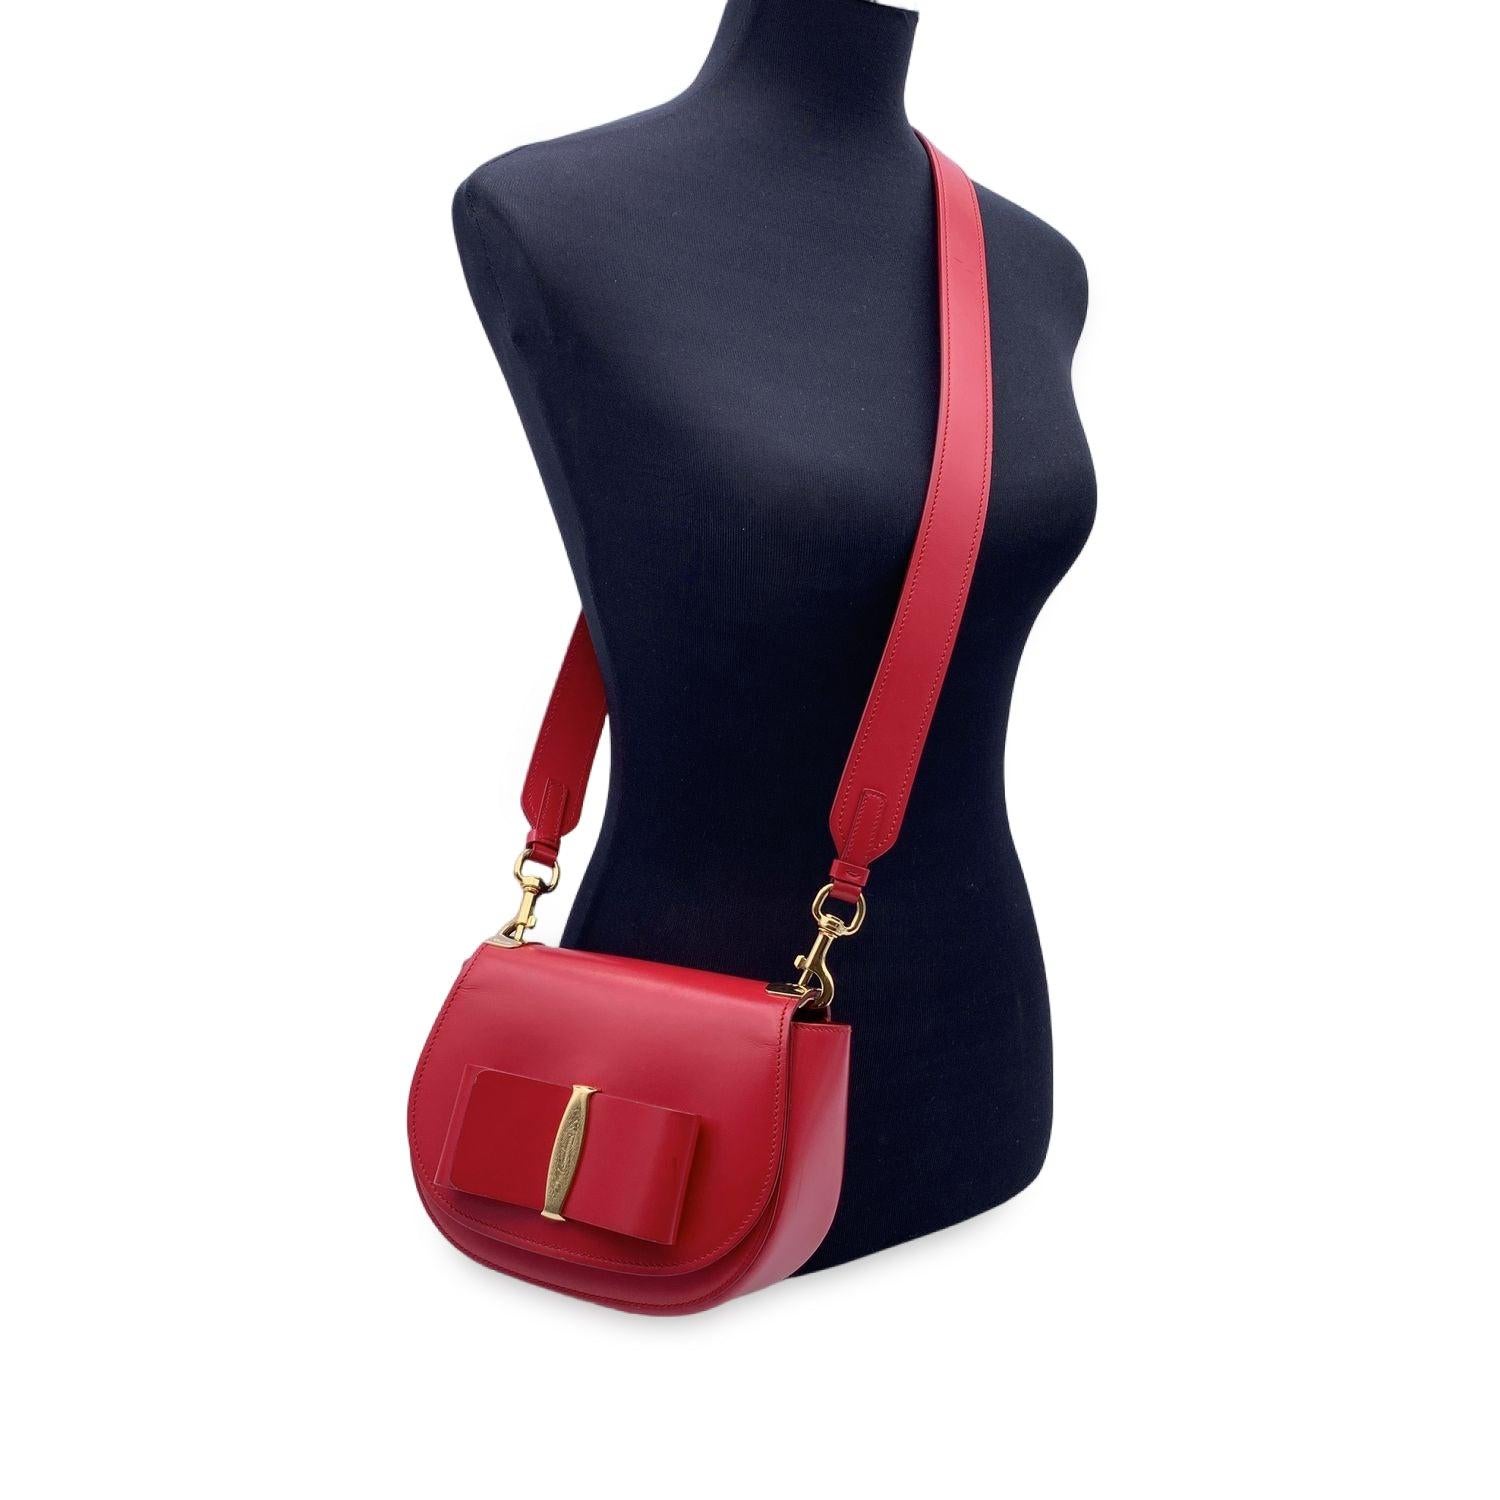 Salvatore Ferragamo red leather 'Anna' shoulder bag. Front Vara bow. Flap with push closure. Leather lining. 1 side open pocket inside. Removable shoulder strap. Salvatore Ferragamo tag inside Condition A - EXCELLENT Gently used. Some light